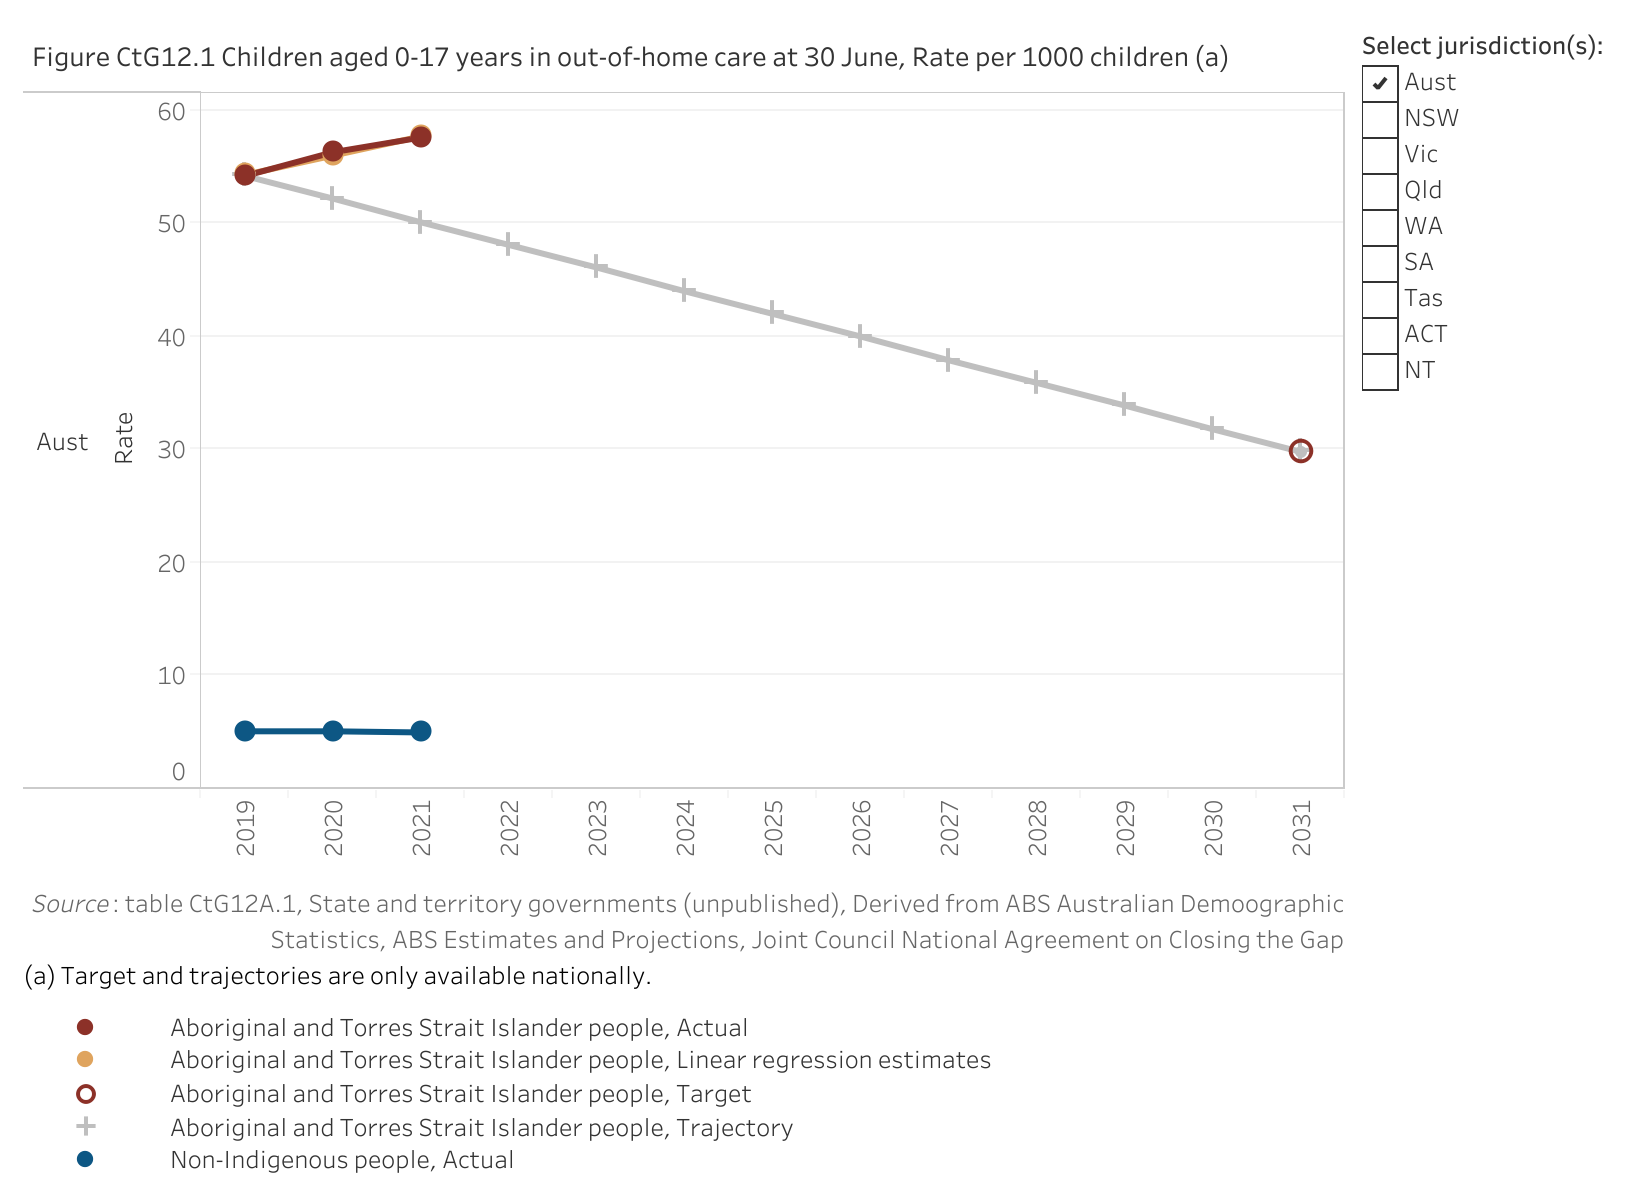 Figure CtG12.1. Line chart showing the rate of Aboriginal and Torres Strait Islander children and non-Indigenous children (aged zero to 17 years) in out-of-home care. Along with these rates, a linear regression is displayed that shows the data trend for the target. The aim under Closing the Gap is to reduce the rate for Aboriginal and Torres Strait Islander children by 45 per cent by 2031. With the 2019 baseline value of 54.2 per 1000 children in the population, this means a reduction to a target value of 29.8 per 1000 children in the population by 2031.